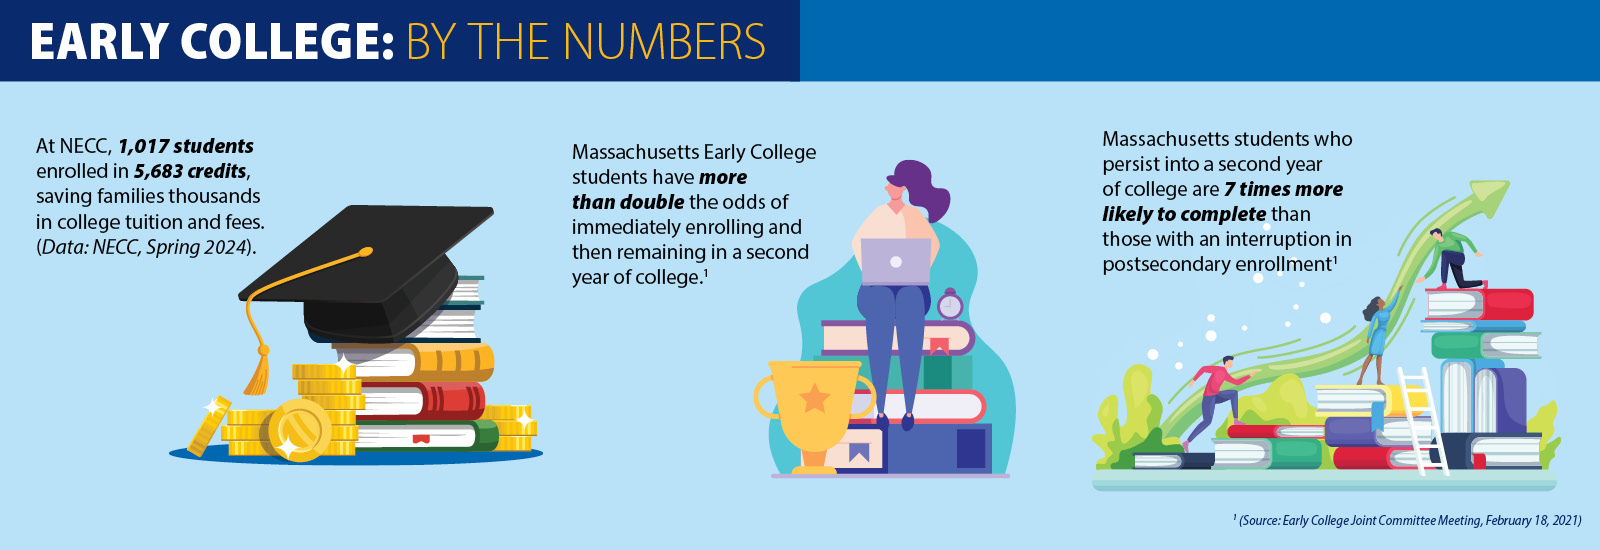 At NECC, 1,017 students enrolled in 5,683 credits, saving families thousands in college tuition and fees. Massachusetts Early College students have more than double the odds of immediately enrolling and then persisting in a second year of college.! Massachusetts Early College students have more than double the odds of immediately enrolling and then persisting in a second year of college.!